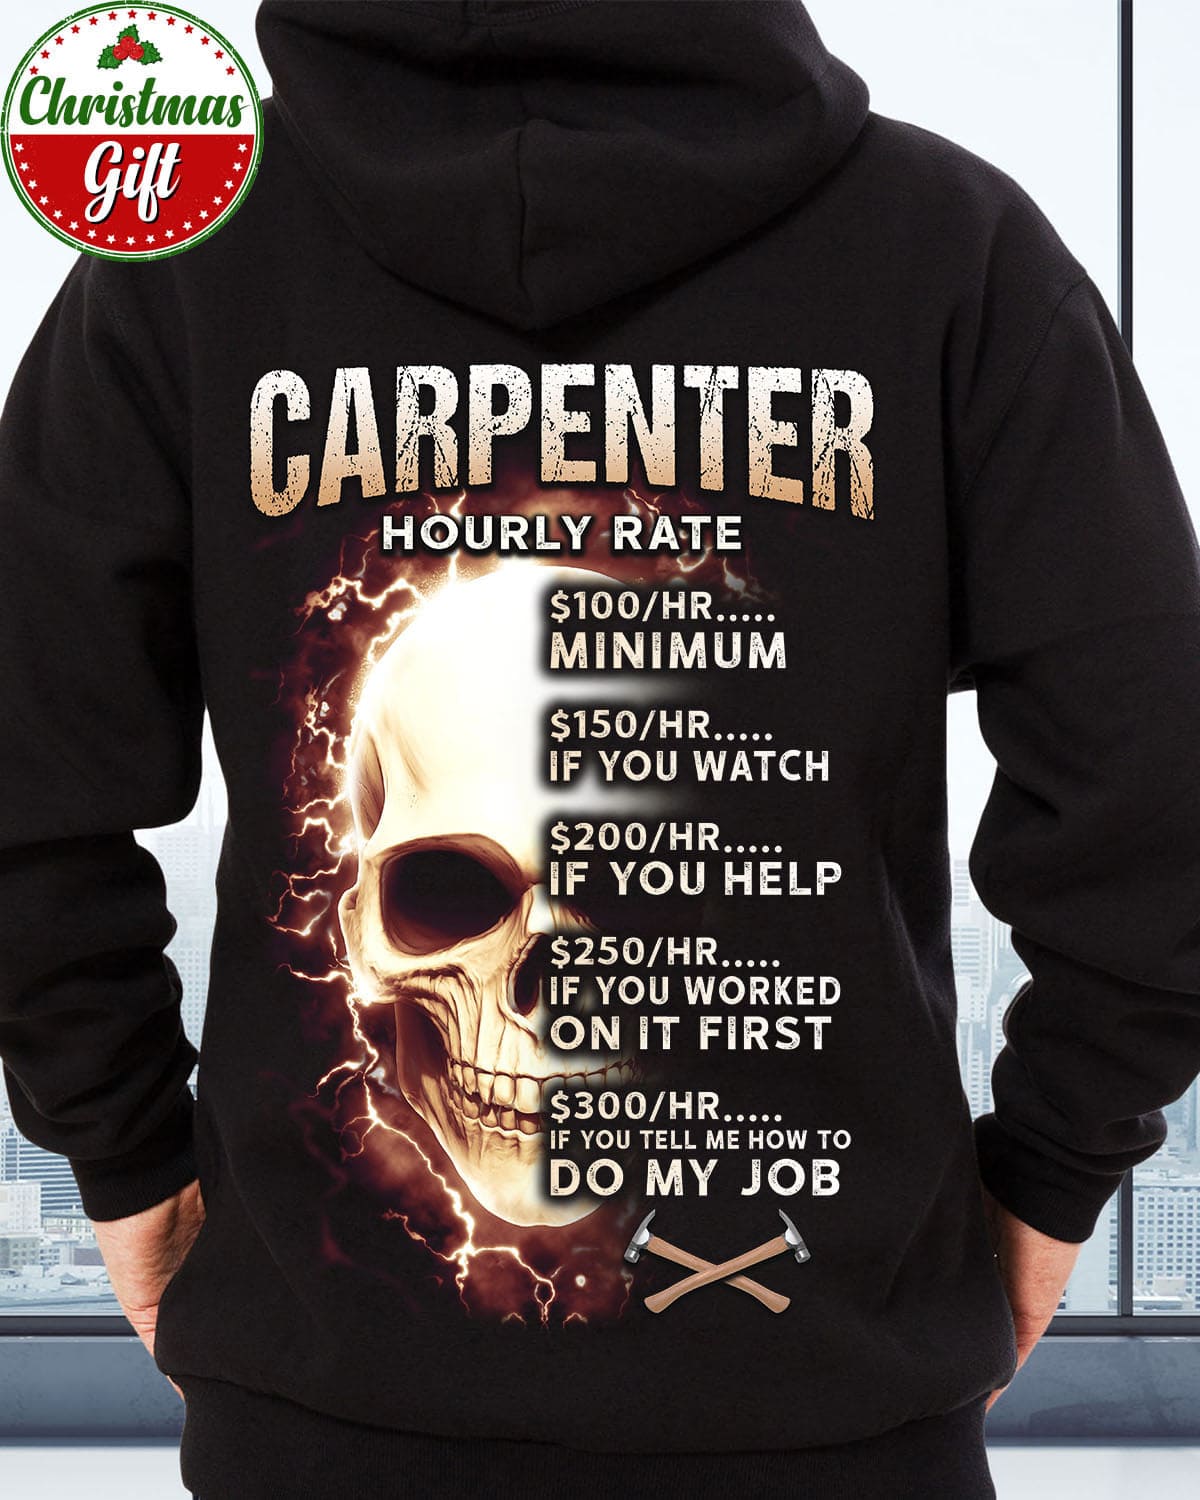 Carpenter hourly rate 100/hr minimum 150/hr if you watch 200/hr if you help 250/hr if you worked on it first - Carpenter Skull